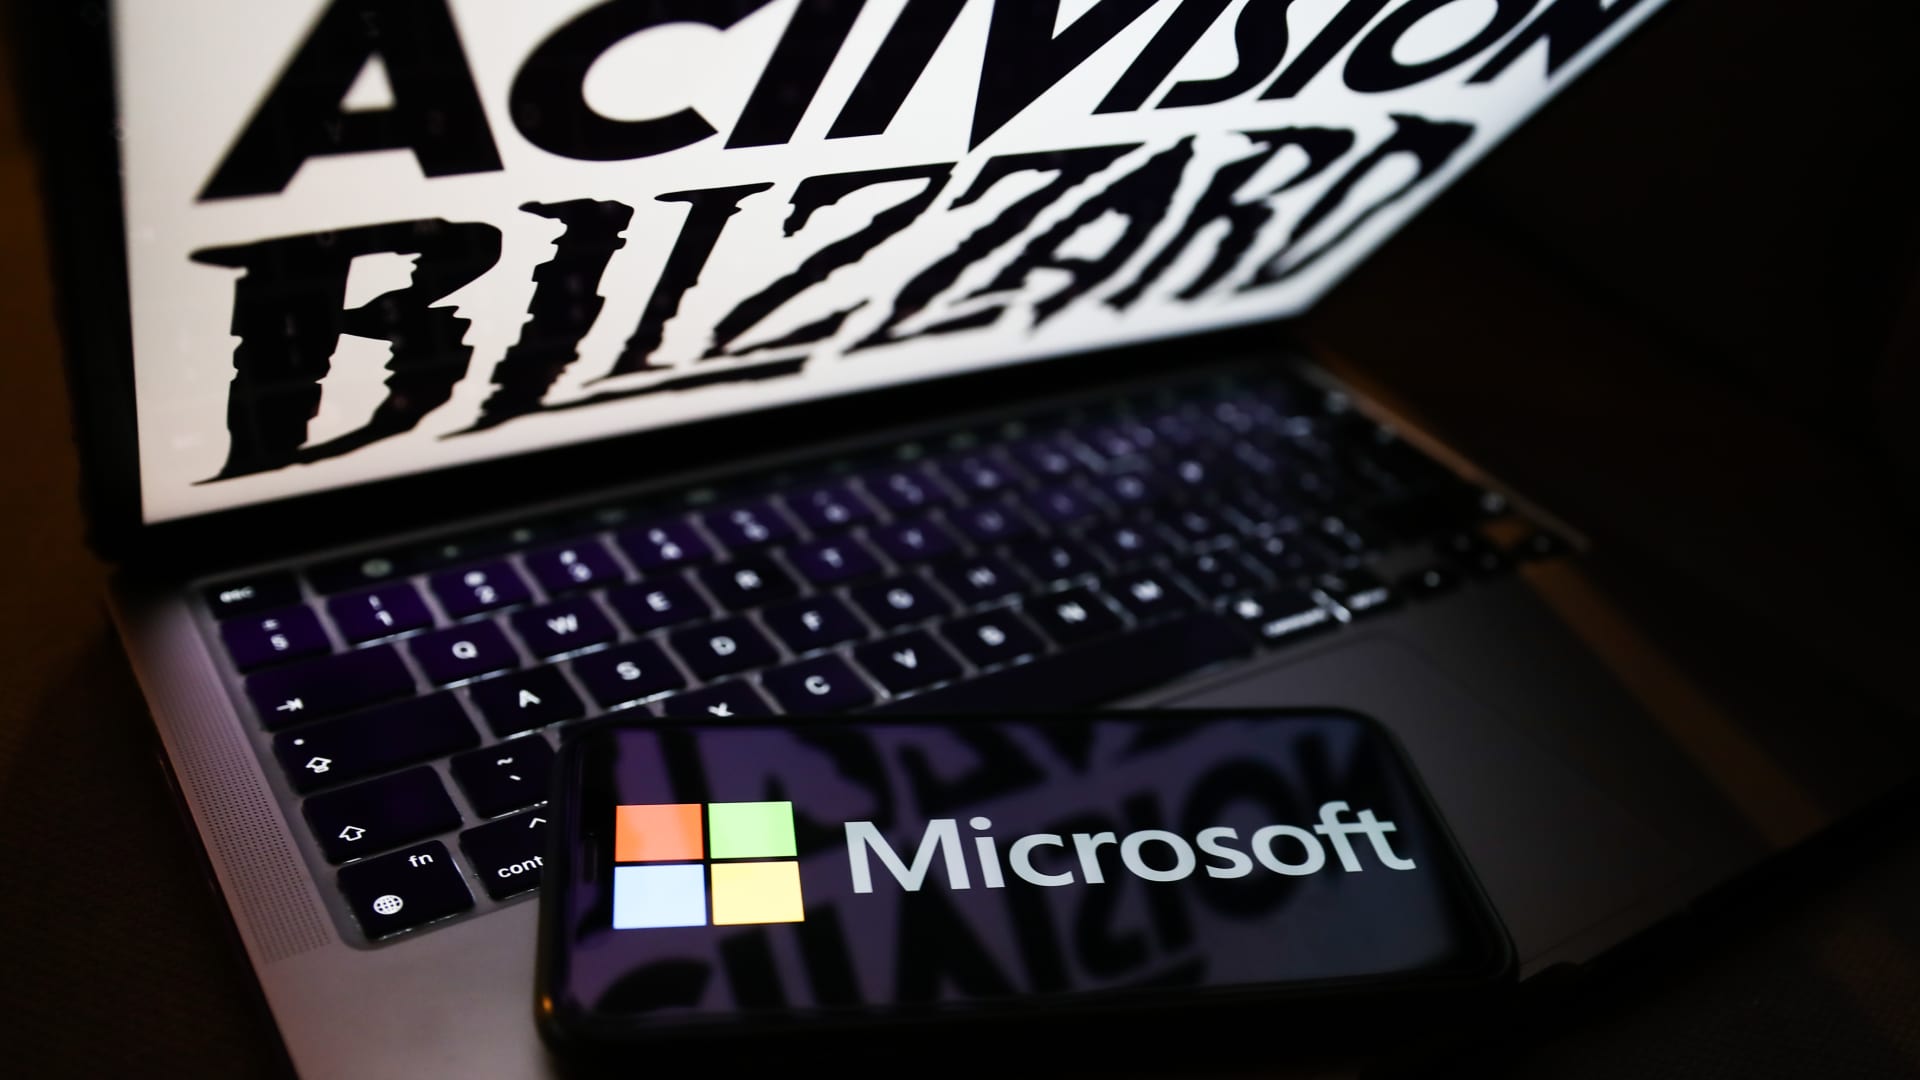 UK regulator says it may clear Microsoft's new Activision Blizzard takeover offer